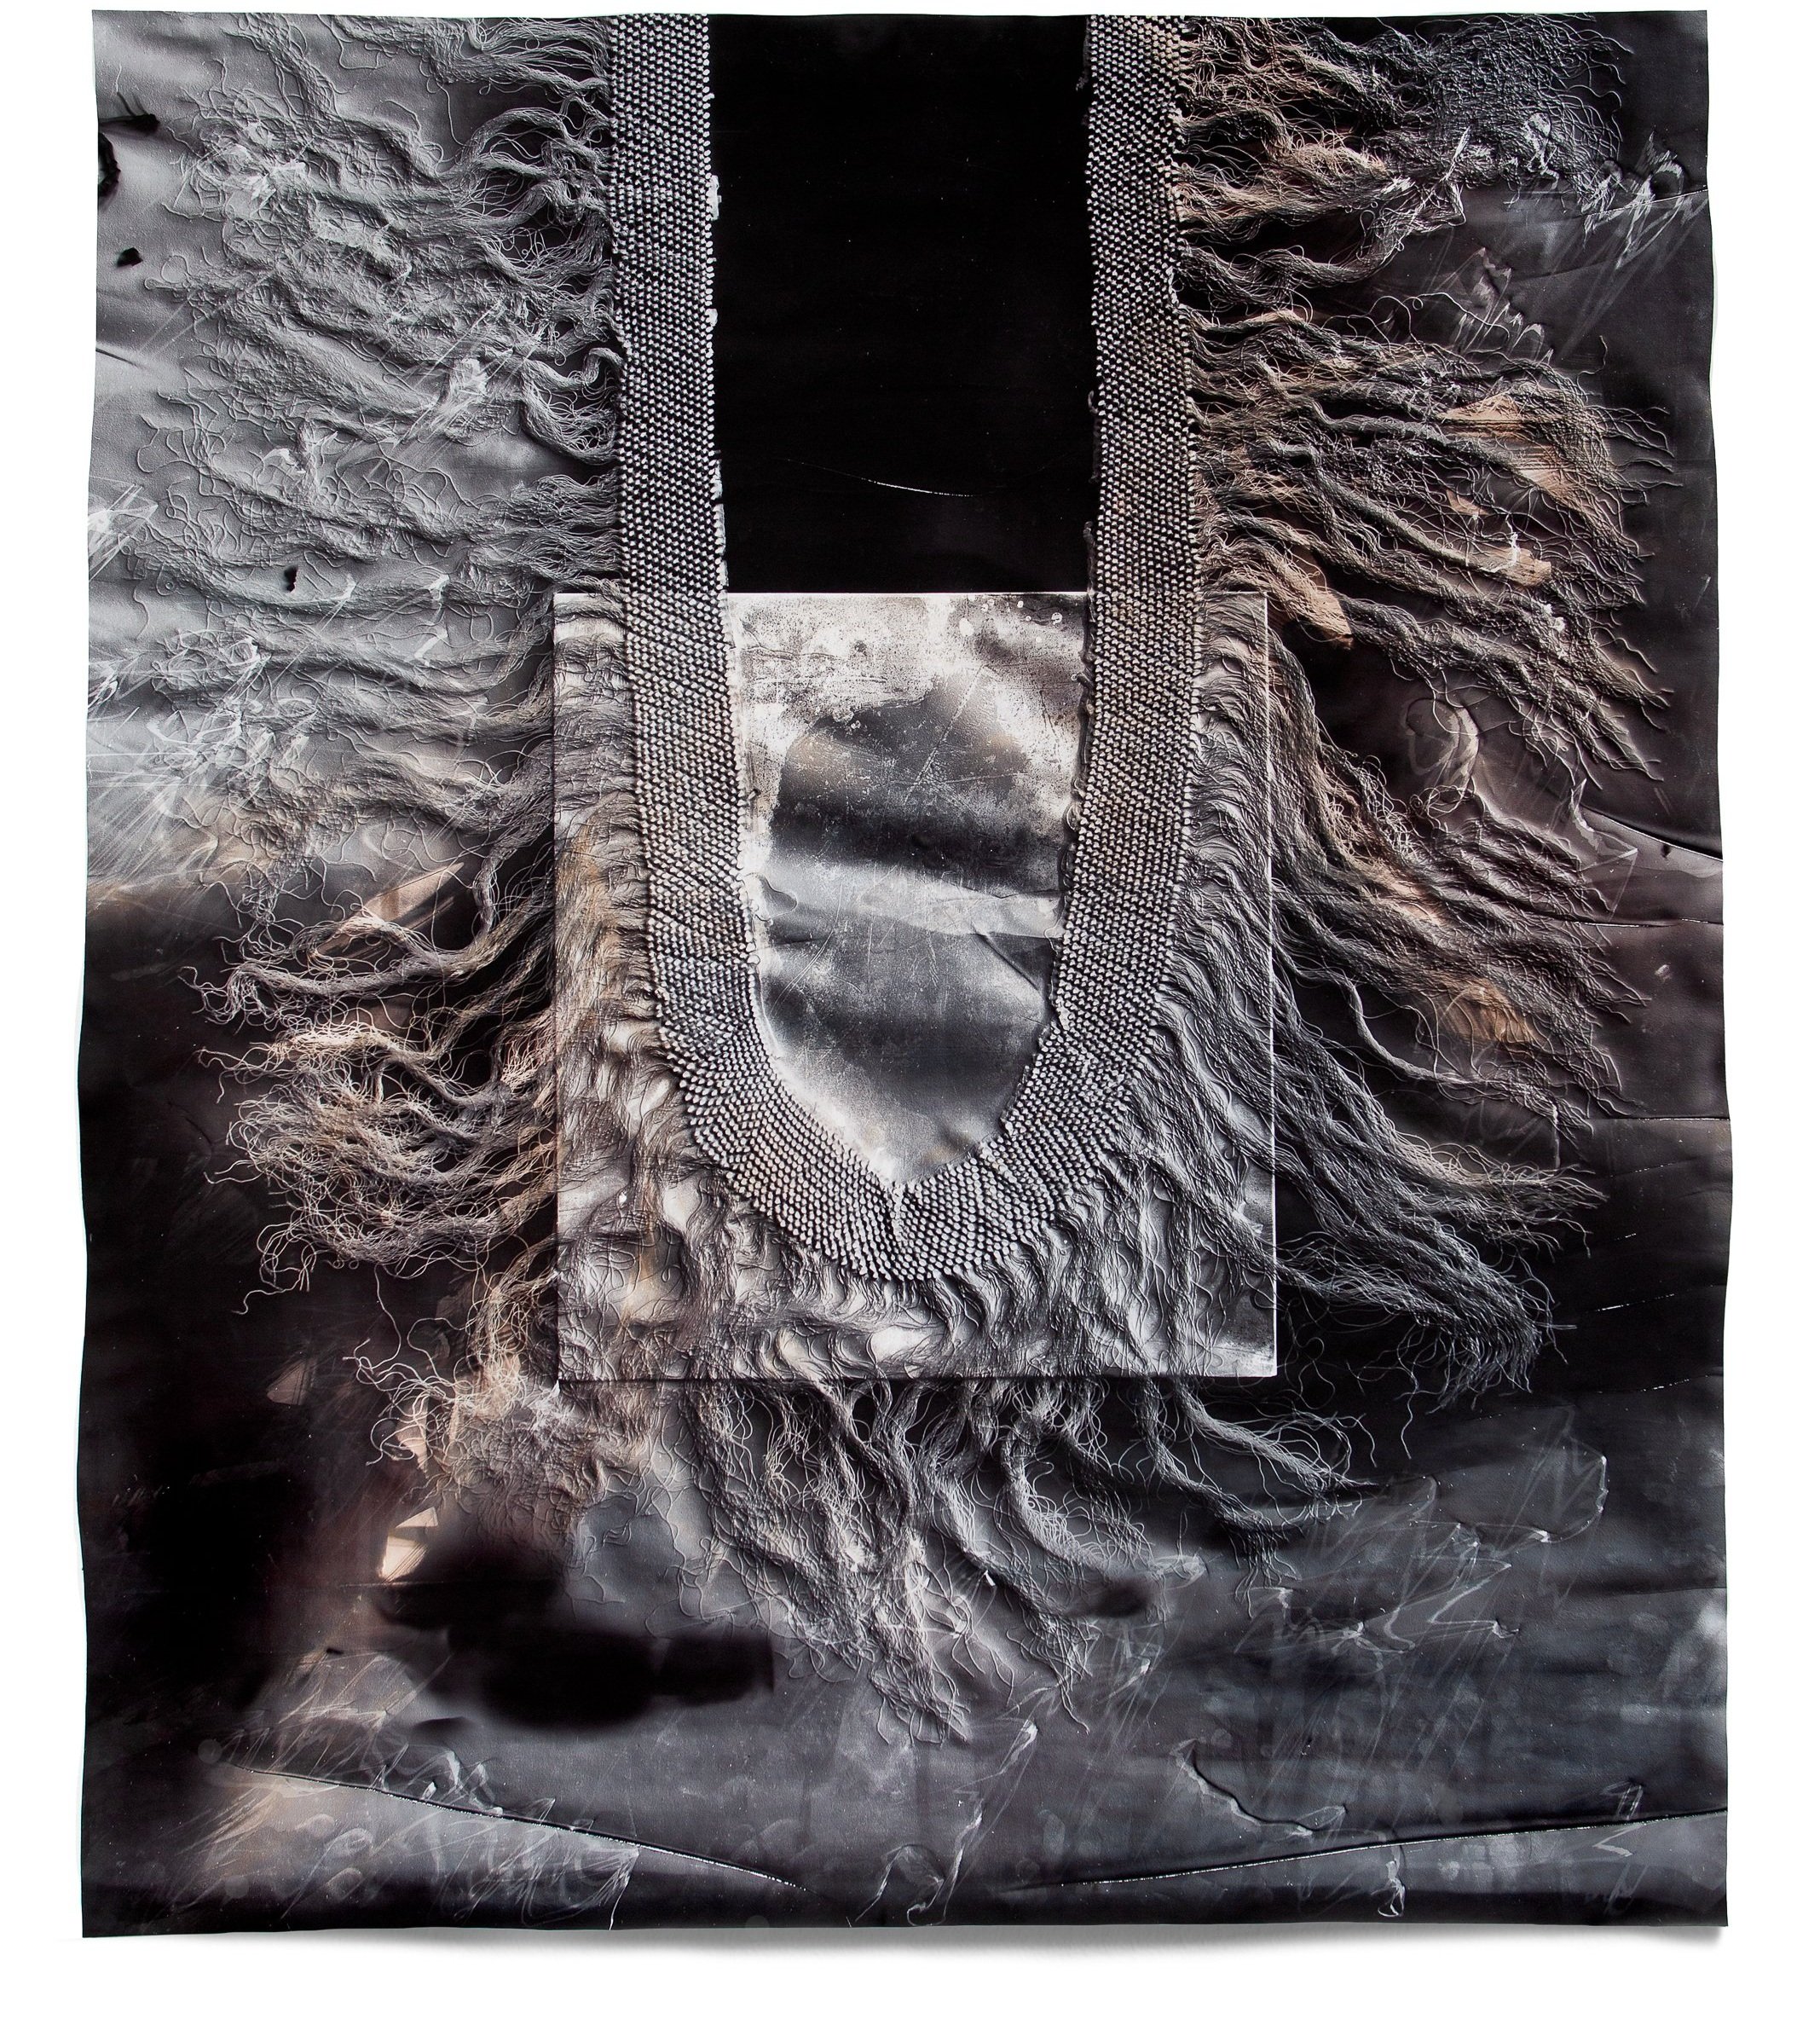   Snakes In The Garden 3,  2018   Photographic relief (embossed silver gelatin photogram, selenium and sepia toned) Impression of silk fringe of a Manton de Manila or Piano Shawl (Spain via China, Philippines, and Mexico, 1870s) 43 x 36 in 